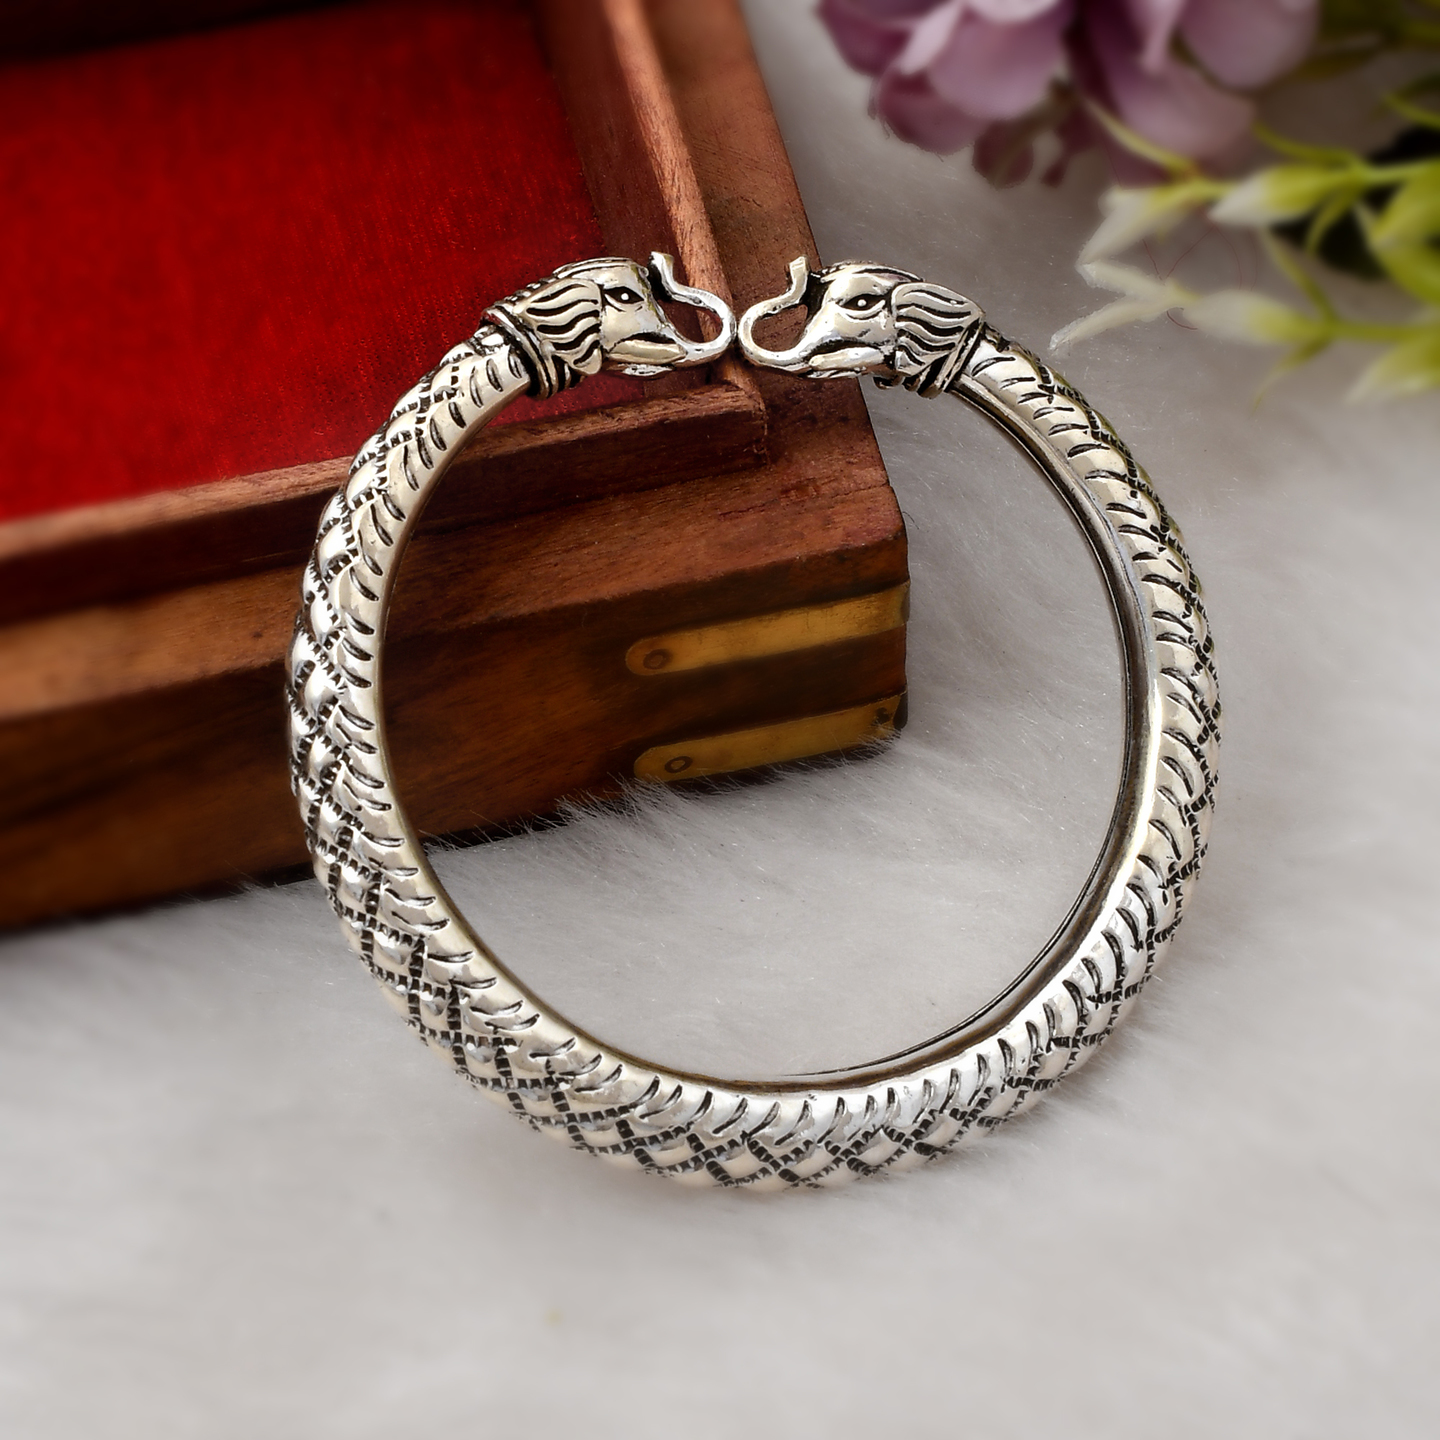 925 Solid Sterling Silver Oxidize Elephant Bangle - Handmade Engraved Bangle - Size 2.6 Inches (Inside Diameter)- Traditional Indian Jewelry